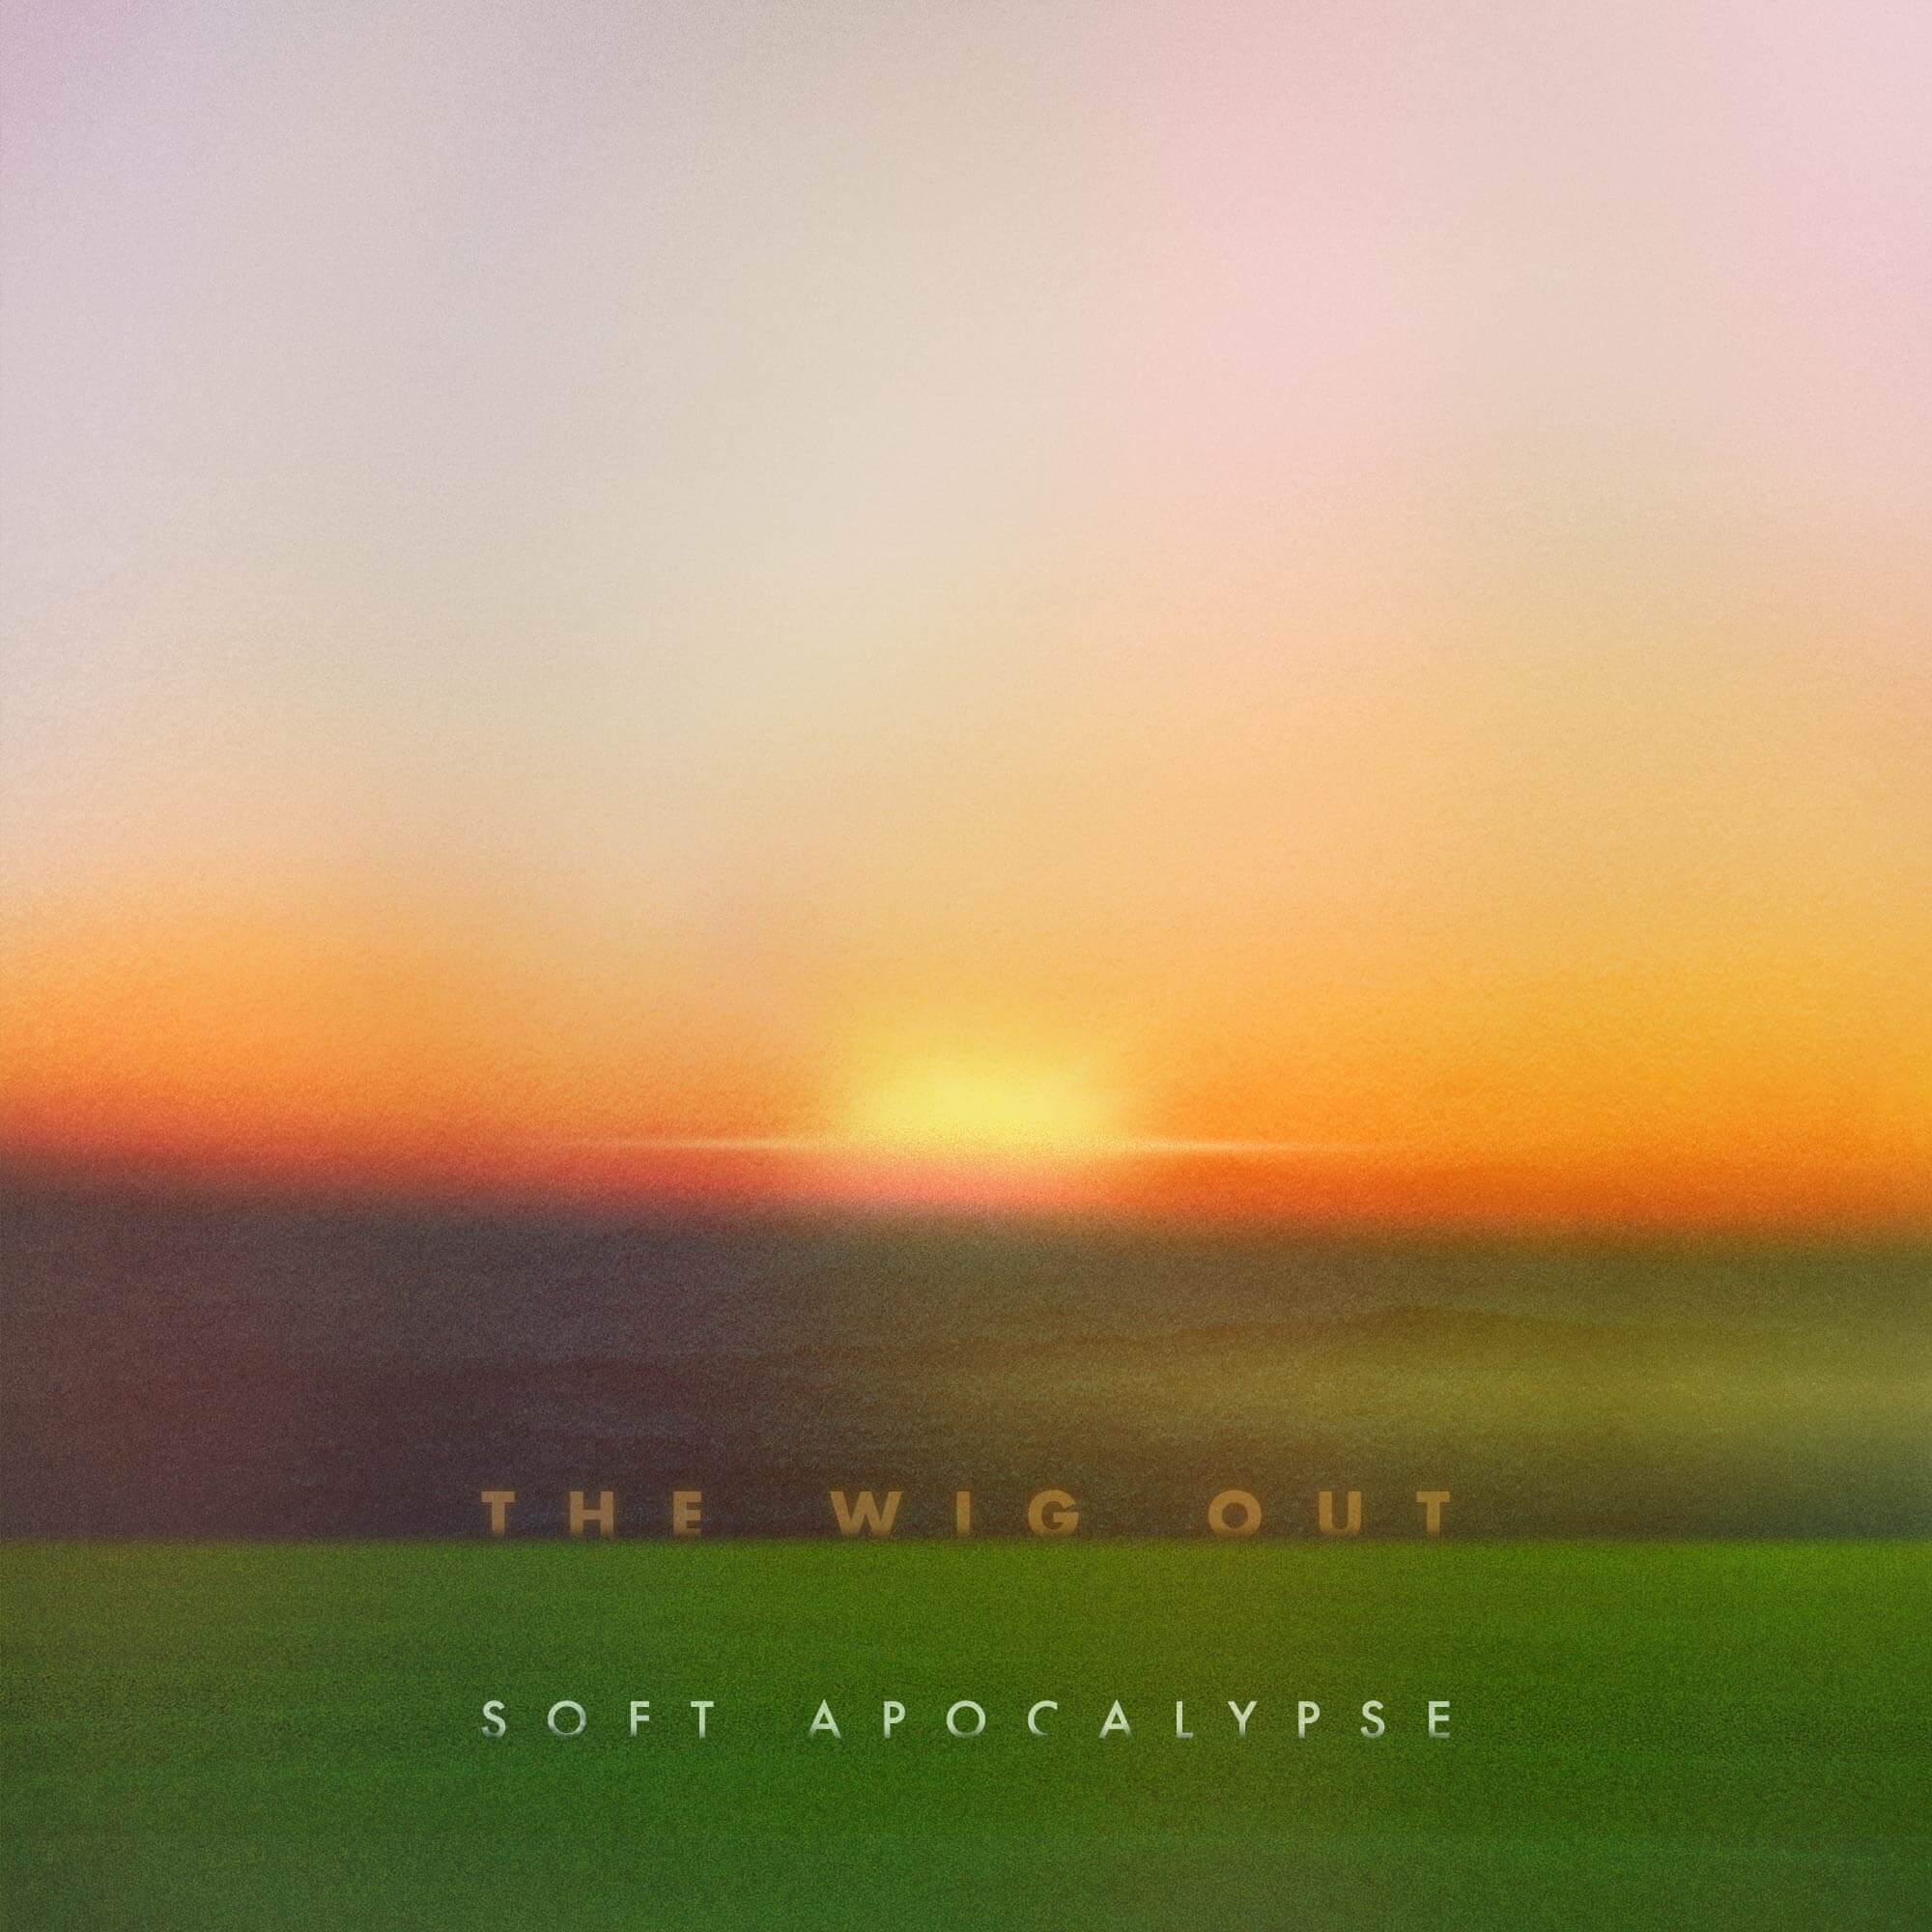 The Wig Out - Motorboater single cover artwork